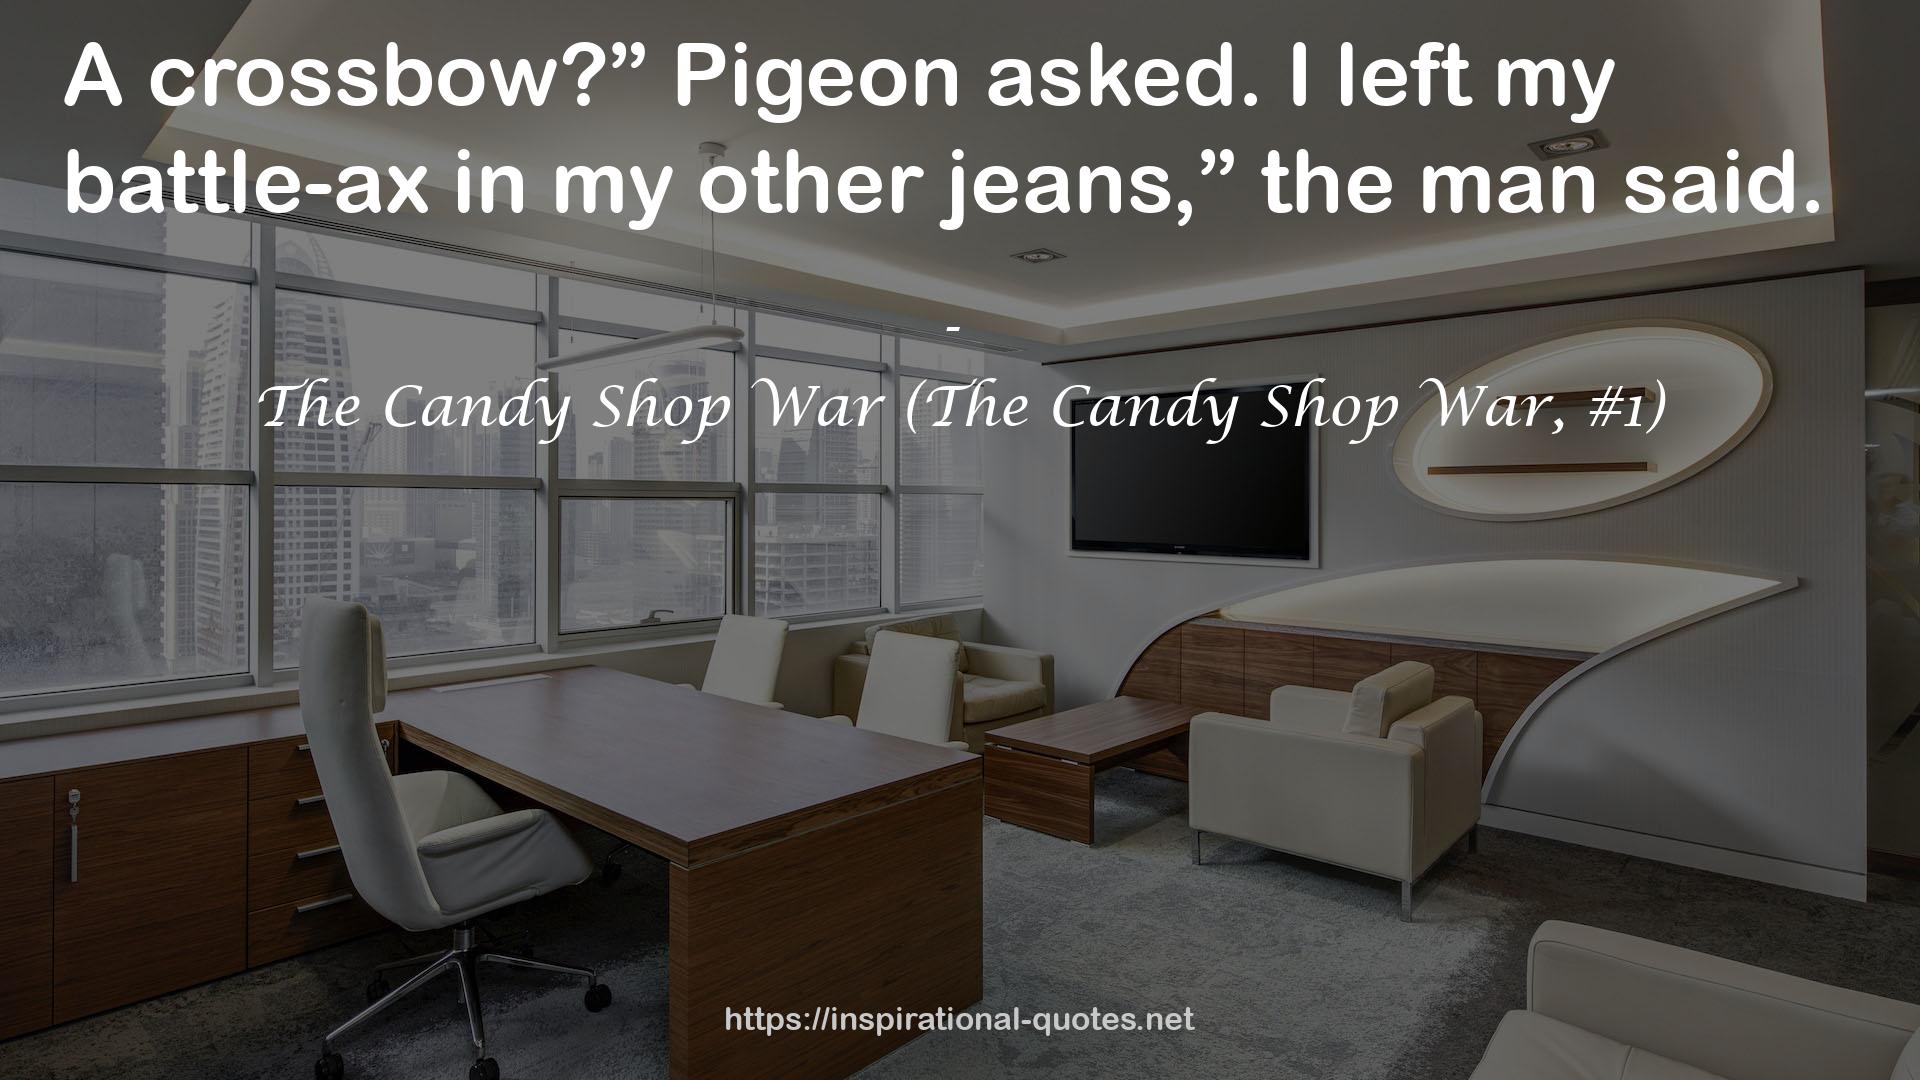 The Candy Shop War (The Candy Shop War, #1) QUOTES